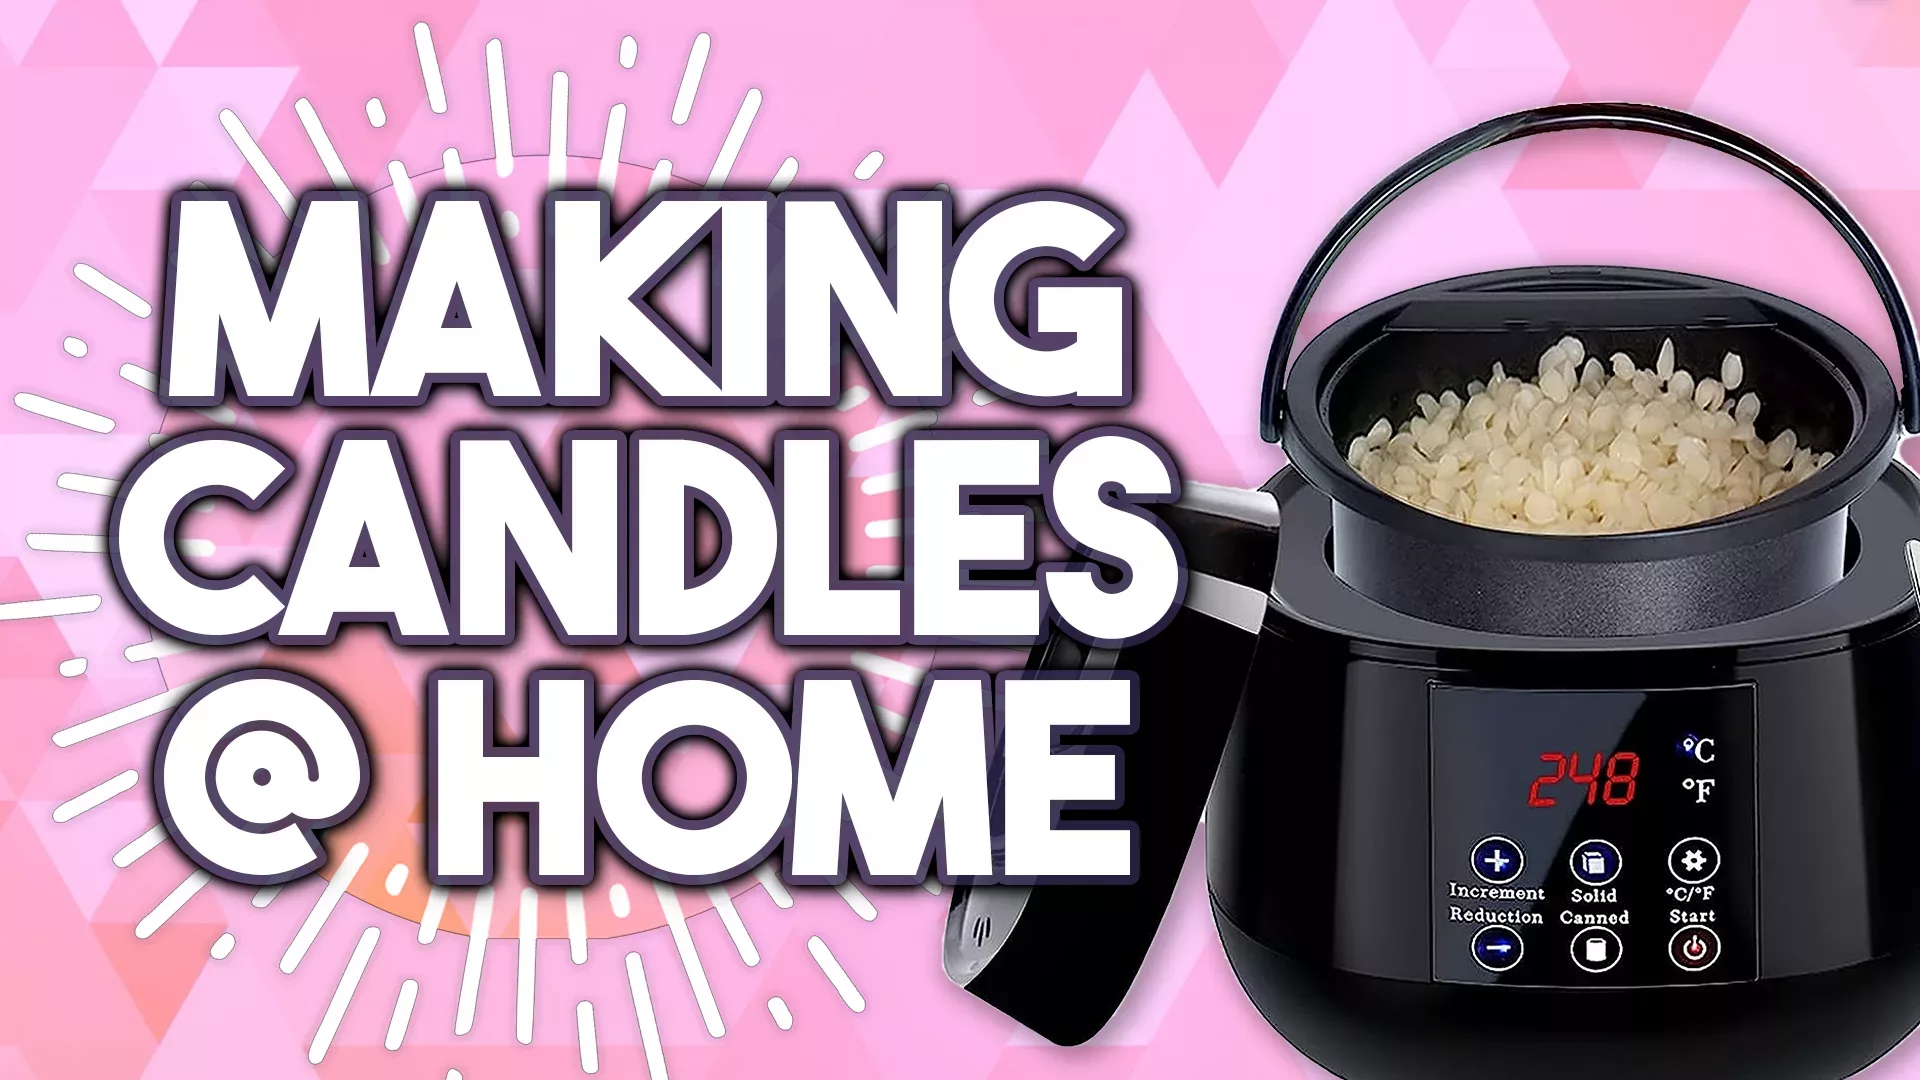 Making Candles at Home with PEEWF Wax Melting Machine & Candle